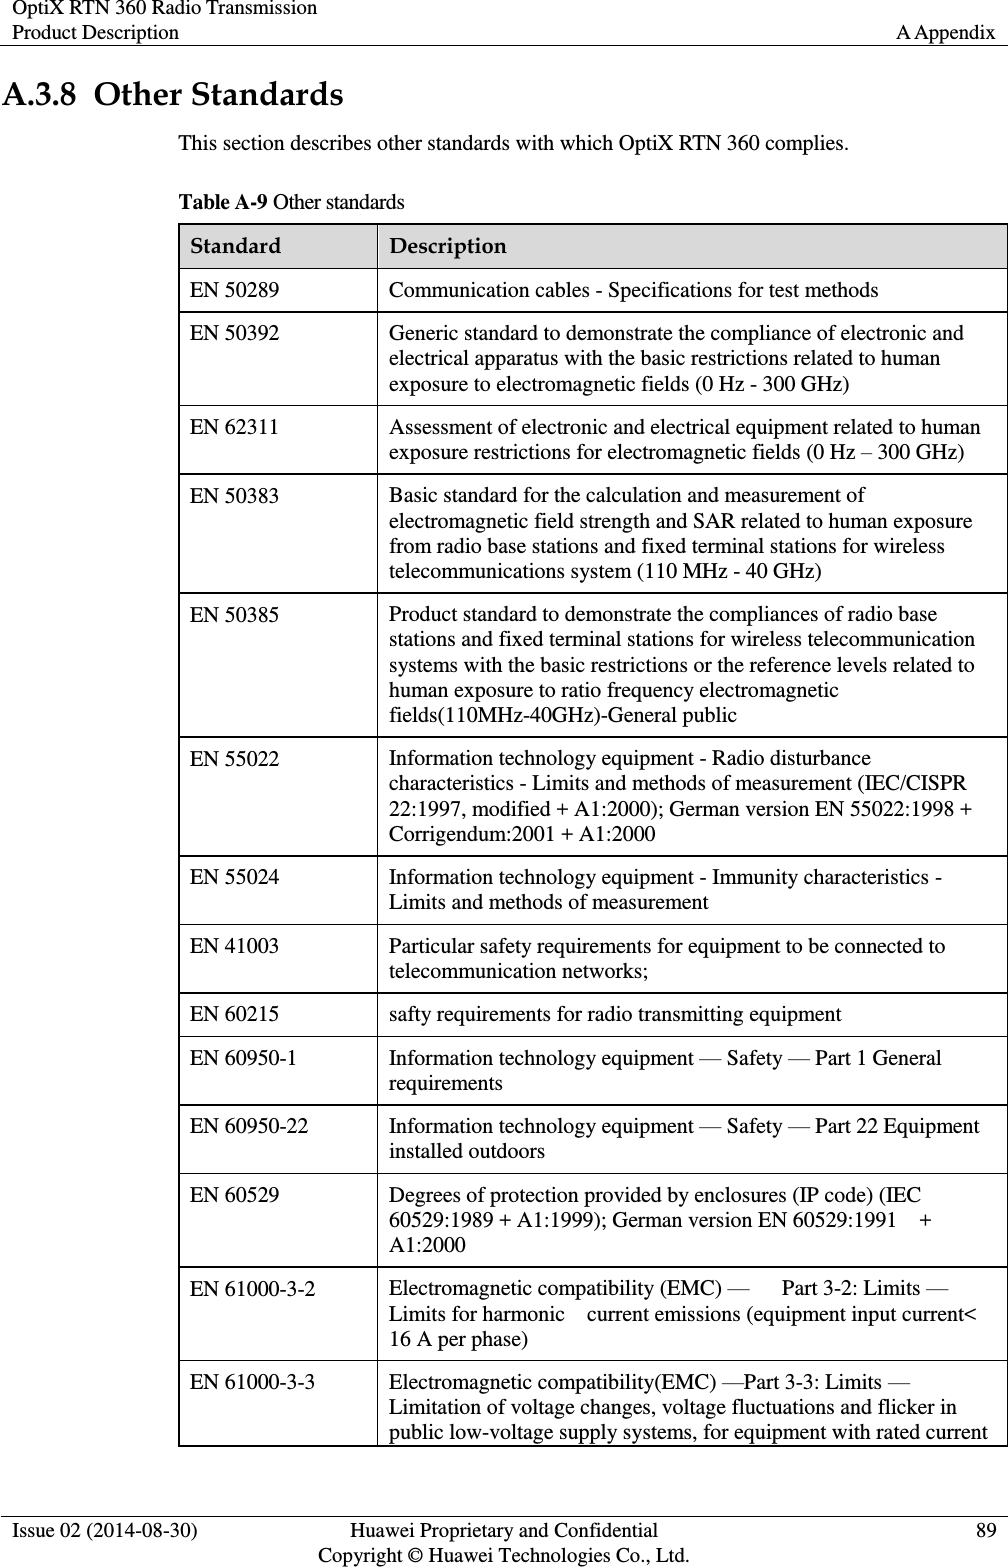 OptiX RTN 360 Radio Transmission Product Description A Appendix  Issue 02 (2014-08-30) Huawei Proprietary and Confidential                                     Copyright © Huawei Technologies Co., Ltd. 89  A.3.8  Other Standards This section describes other standards with which OptiX RTN 360 complies. Table A-9 Other standards Standard Description EN 50289 Communication cables - Specifications for test methods EN 50392 Generic standard to demonstrate the compliance of electronic and electrical apparatus with the basic restrictions related to human exposure to electromagnetic fields (0 Hz - 300 GHz) EN 62311 Assessment of electronic and electrical equipment related to human exposure restrictions for electromagnetic fields (0 Hz – 300 GHz) EN 50383 Basic standard for the calculation and measurement of electromagnetic field strength and SAR related to human exposure from radio base stations and fixed terminal stations for wireless telecommunications system (110 MHz - 40 GHz) EN 50385 Product standard to demonstrate the compliances of radio base stations and fixed terminal stations for wireless telecommunication systems with the basic restrictions or the reference levels related to human exposure to ratio frequency electromagnetic fields(110MHz-40GHz)-General public EN 55022 Information technology equipment - Radio disturbance characteristics - Limits and methods of measurement (IEC/CISPR 22:1997, modified + A1:2000); German version EN 55022:1998 + Corrigendum:2001 + A1:2000 EN 55024 Information technology equipment - Immunity characteristics - Limits and methods of measurement   EN 41003 Particular safety requirements for equipment to be connected to telecommunication networks; EN 60215 safty requirements for radio transmitting equipment EN 60950-1 Information technology equipment — Safety — Part 1 General requirements EN 60950-22 Information technology equipment — Safety — Part 22 Equipment installed outdoors EN 60529 Degrees of protection provided by enclosures (IP code) (IEC 60529:1989 + A1:1999); German version EN 60529:1991    + A1:2000 EN 61000-3-2 Electromagnetic compatibility (EMC) —      Part 3-2: Limits — Limits for harmonic    current emissions (equipment input current&lt; 16 A per phase) EN 61000-3-3   Electromagnetic compatibility(EMC) ––Part 3-3: Limits — Limitation of voltage changes, voltage fluctuations and flicker in public low-voltage supply systems, for equipment with rated current 